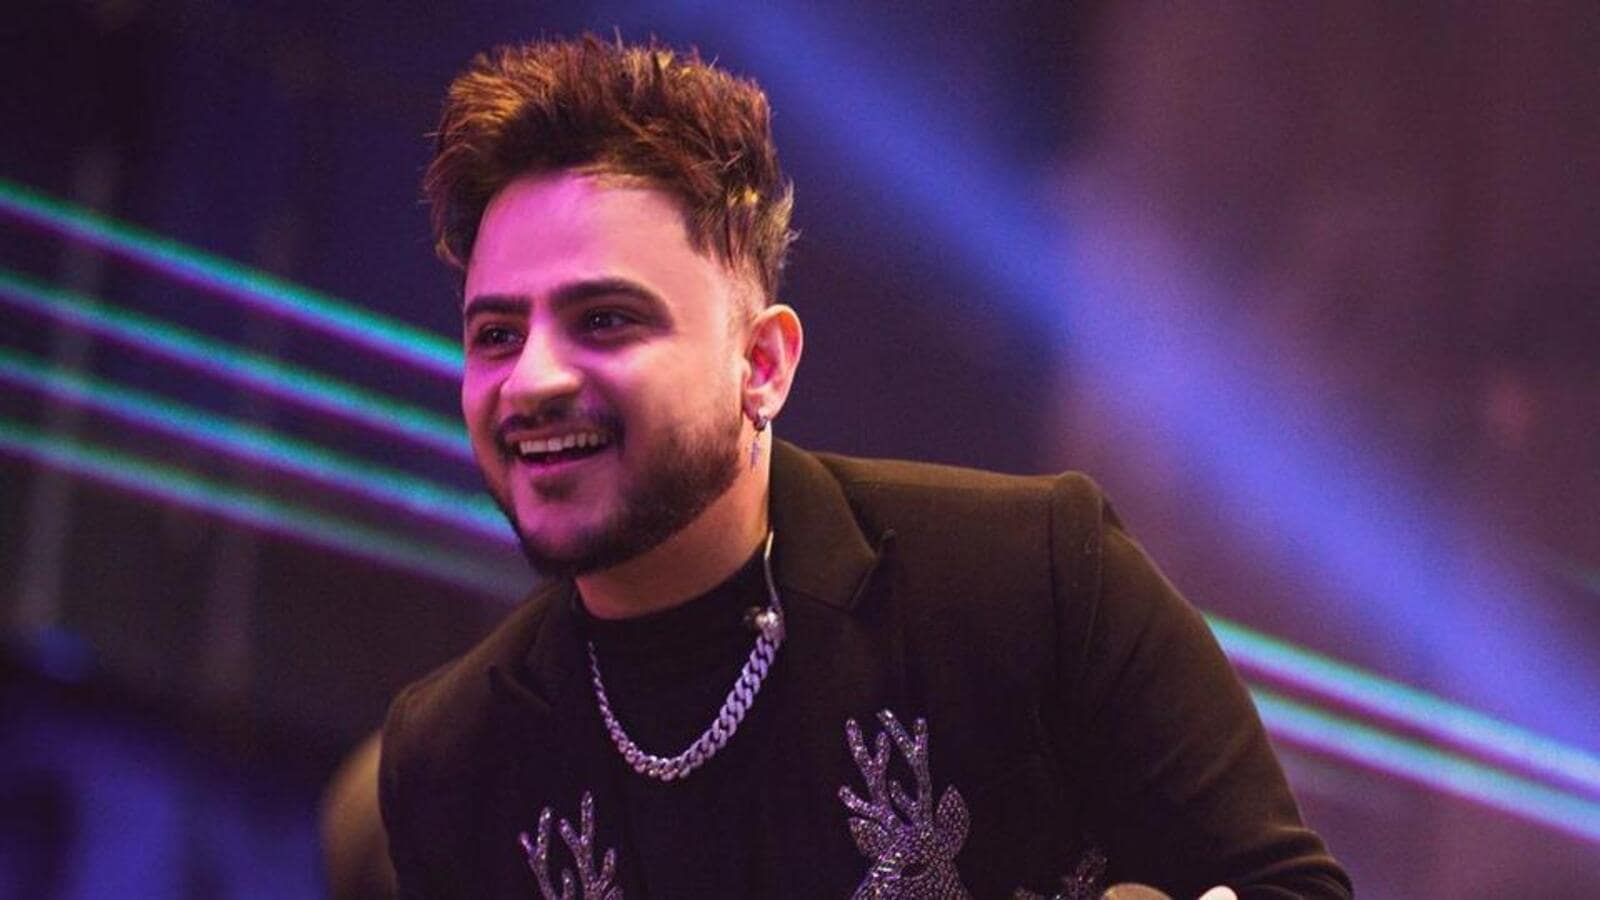 EXCLUSIVE: Millind Gaba confirms wedding, says, ‘Want everything to be perfect’